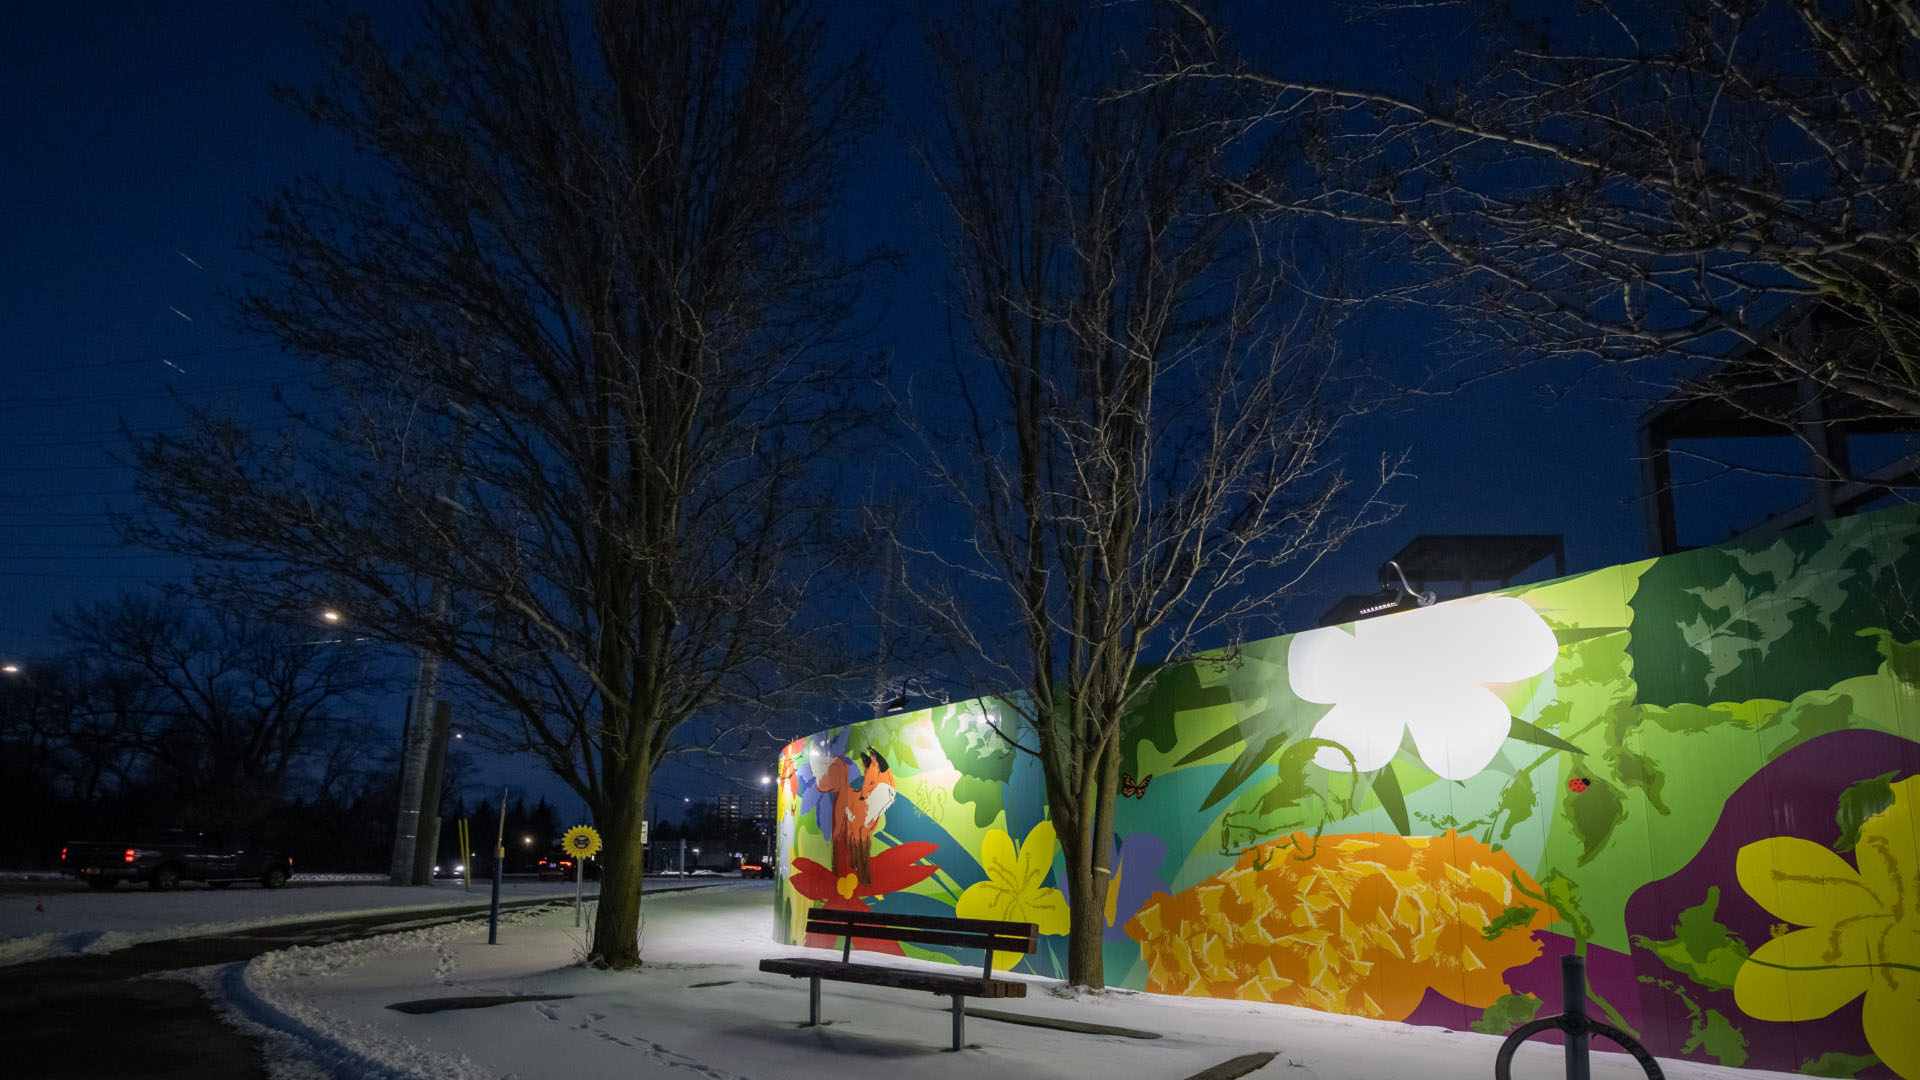 artist hoarding at lakeview village winter